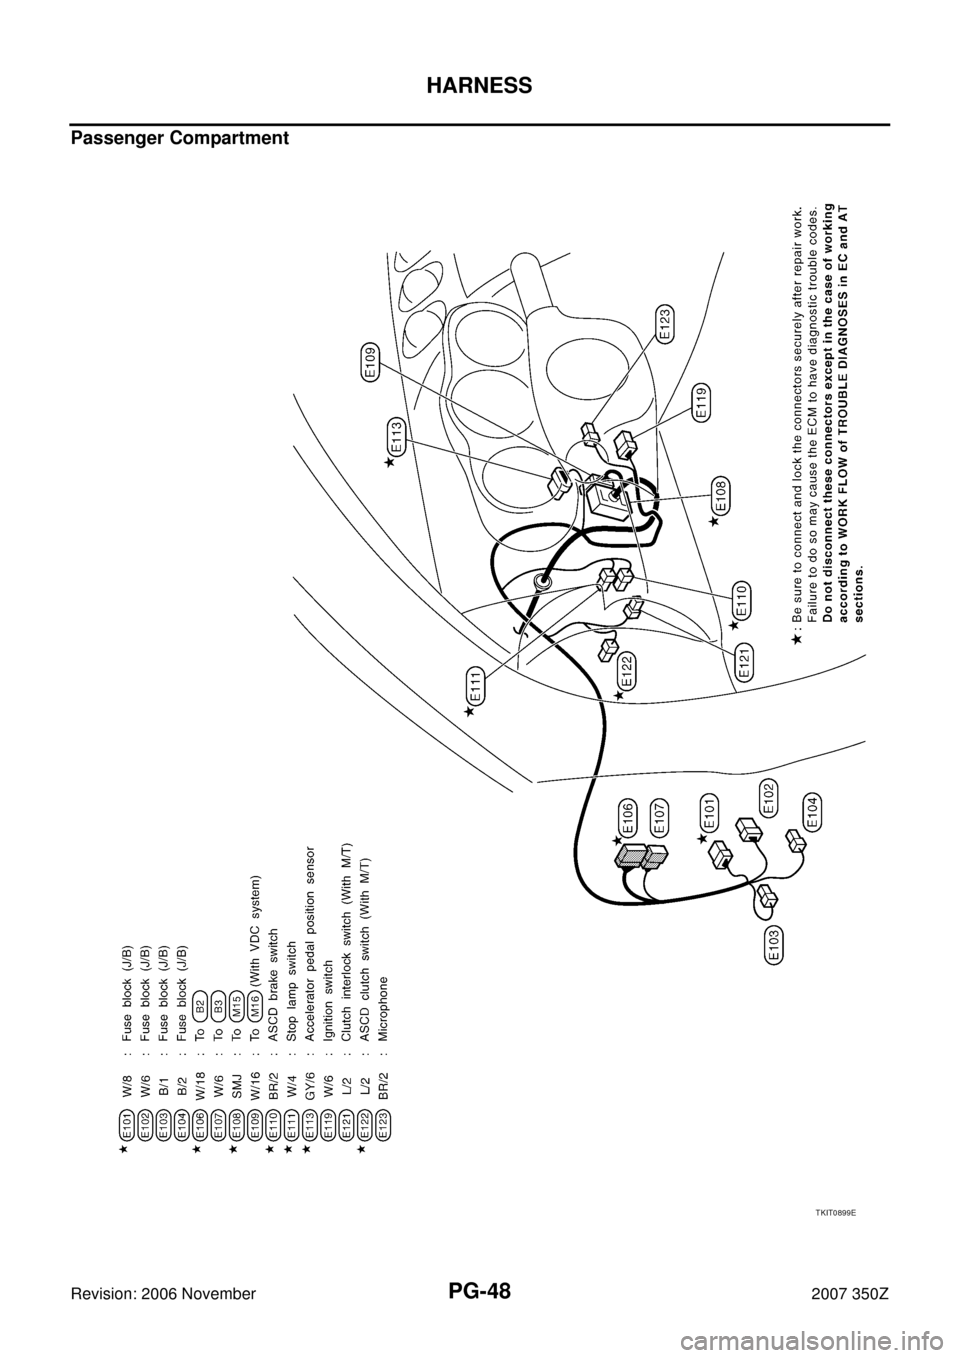 NISSAN 350Z 2007 Z33 Power Supply, Ground And Circuit Service Manual PG-48
HARNESS
Revision: 2006 November2007 350Z
Passenger Compartment
TKIT0899E 